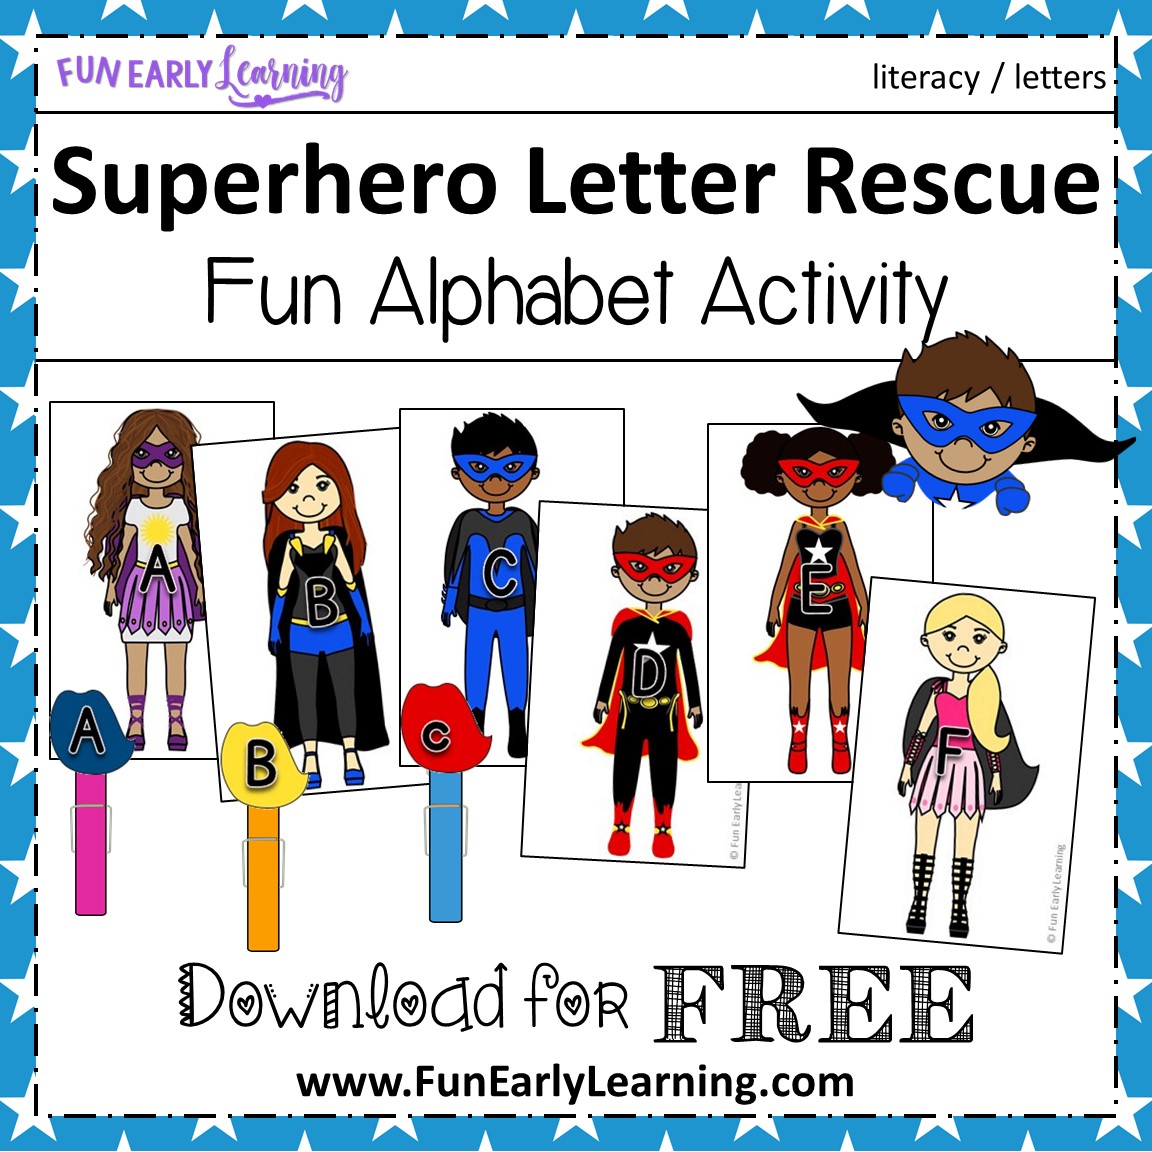 Superhero Theme Sequencing Puzzles Number Sense Activity  Coordinate  graphing mystery picture, Letter recognition, Language centers